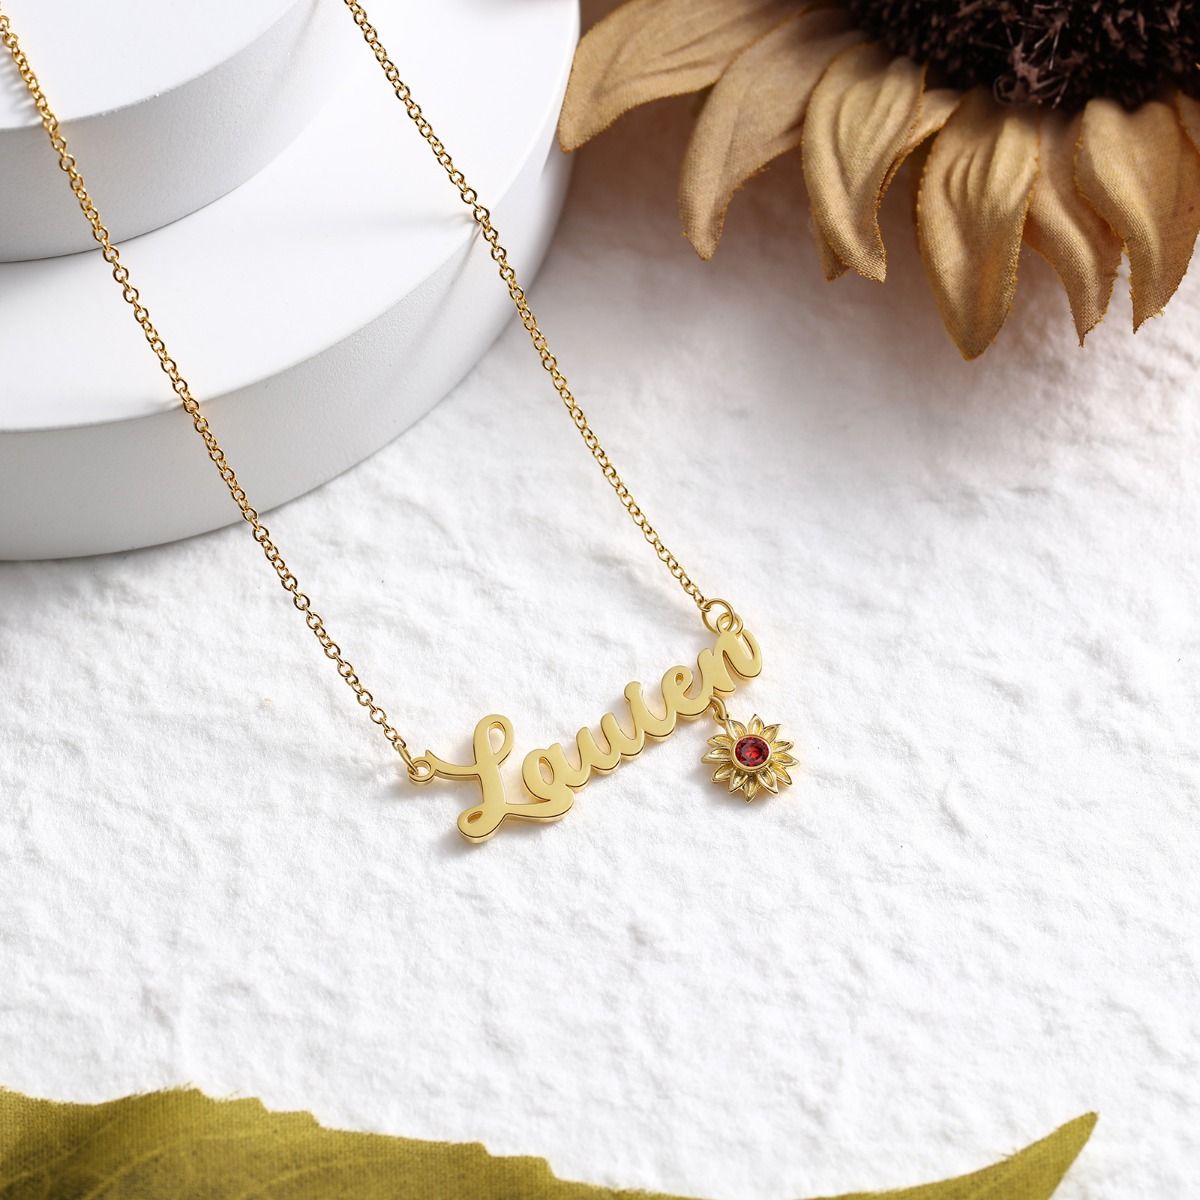 Bespoke Name Necklace With Birthstone Sunflower | Cutom Made Name Necklace